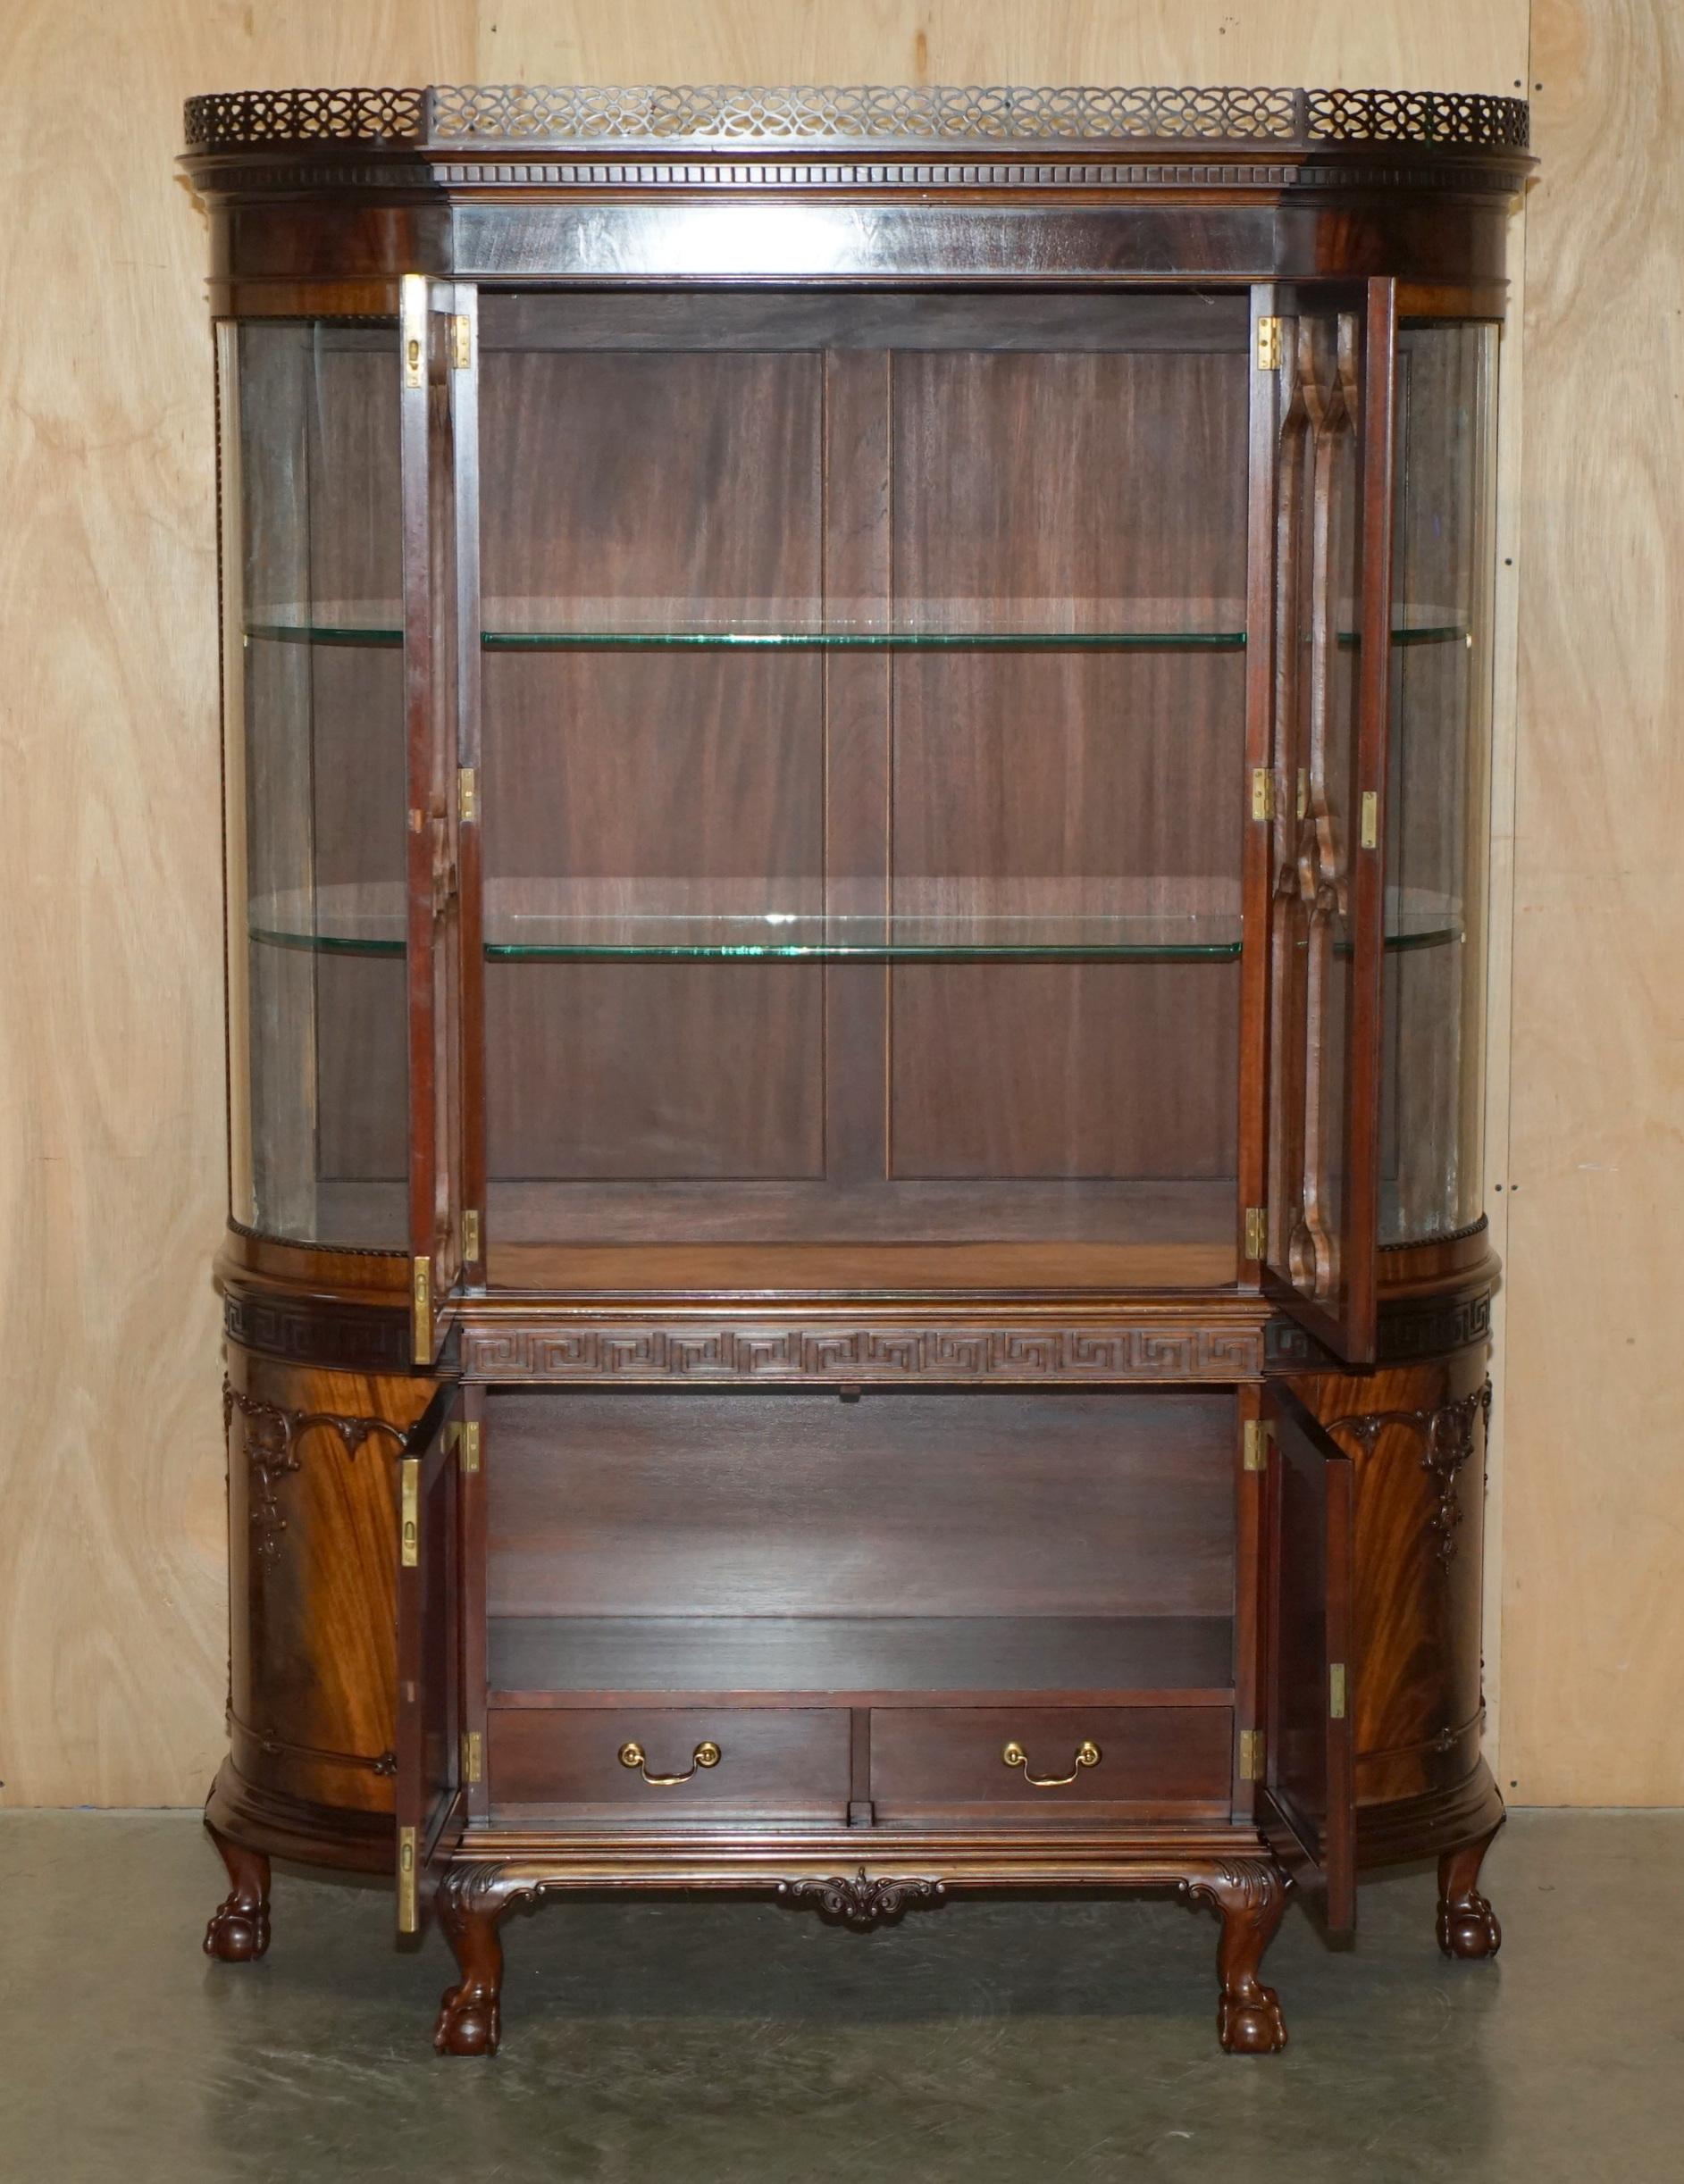 EXQUISITÉ CHARLES BAKER OF CHIPPENDALE HOUSE STAMPED DISPLAY CABINET en vente 10